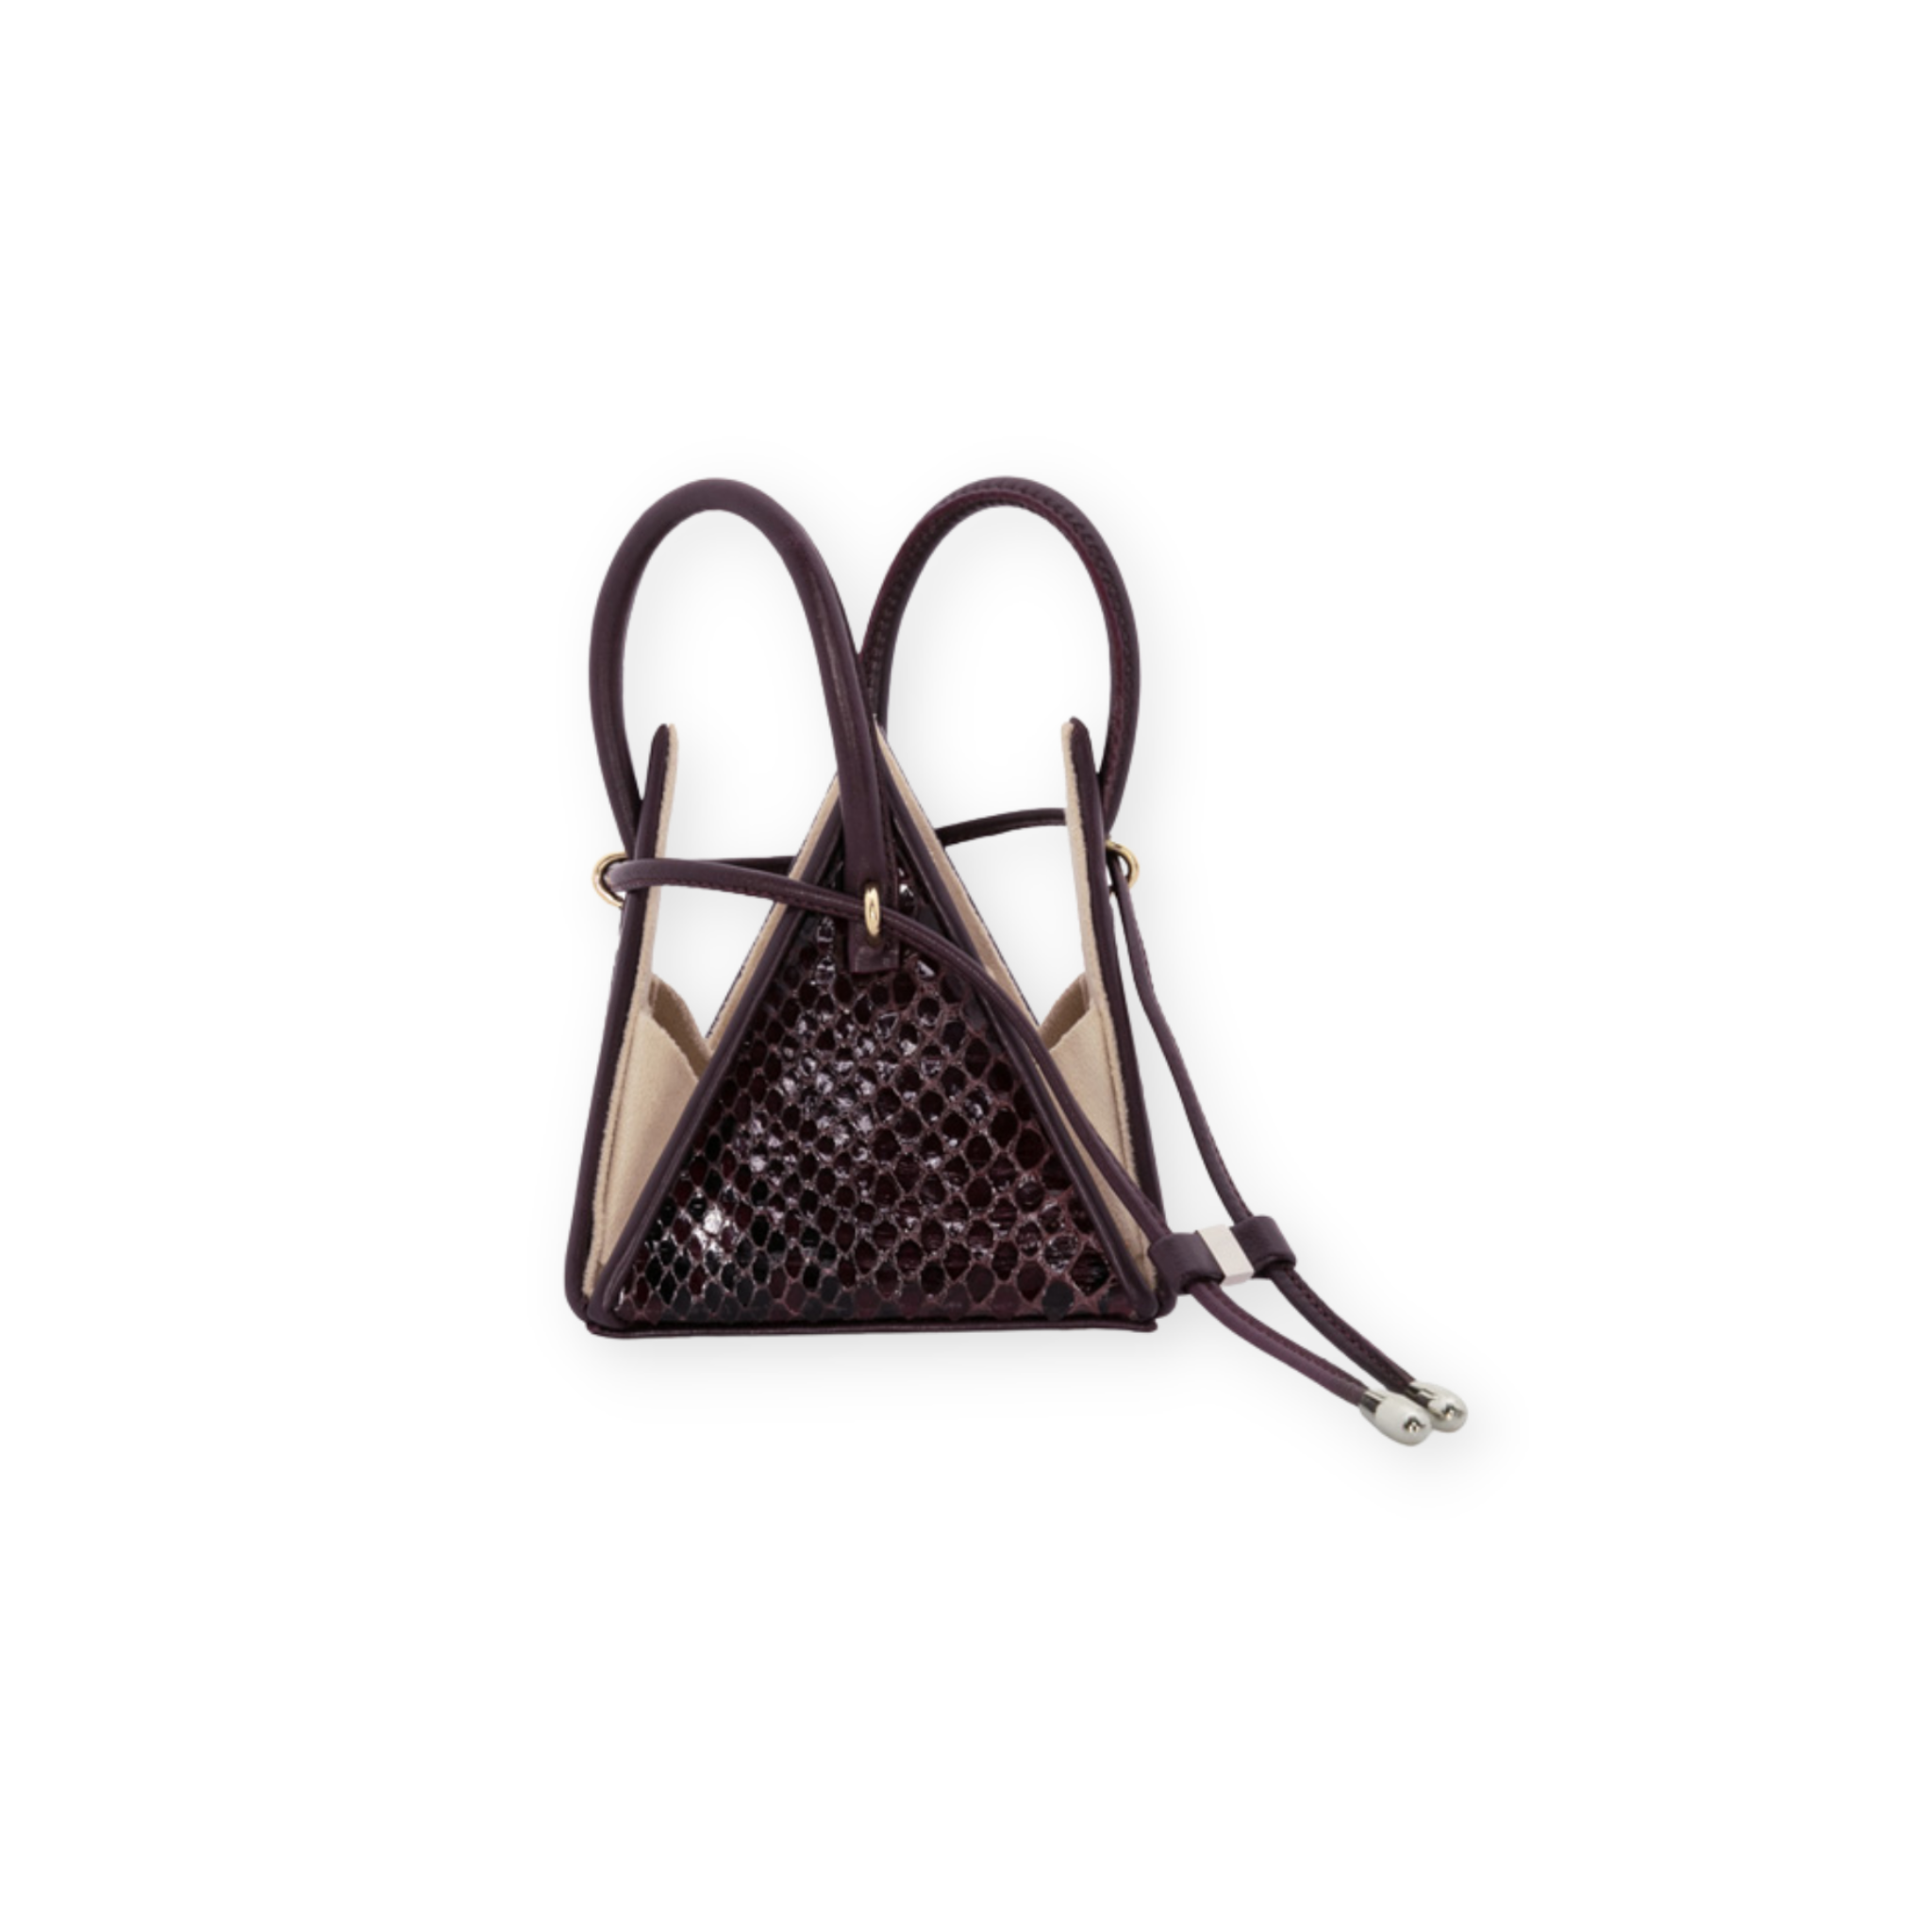 Buy now the Exotic LIA Mini bag inspired by the geometric shapes of our designer's birth city Barcelona, and its world known artist, Antonio Gaudí, architect of the world wonder La Sagrada Familia. The Exotic Lia Python Burgundy Mini bag has a unique and functional pyramidal design able to fit all your essentials. 